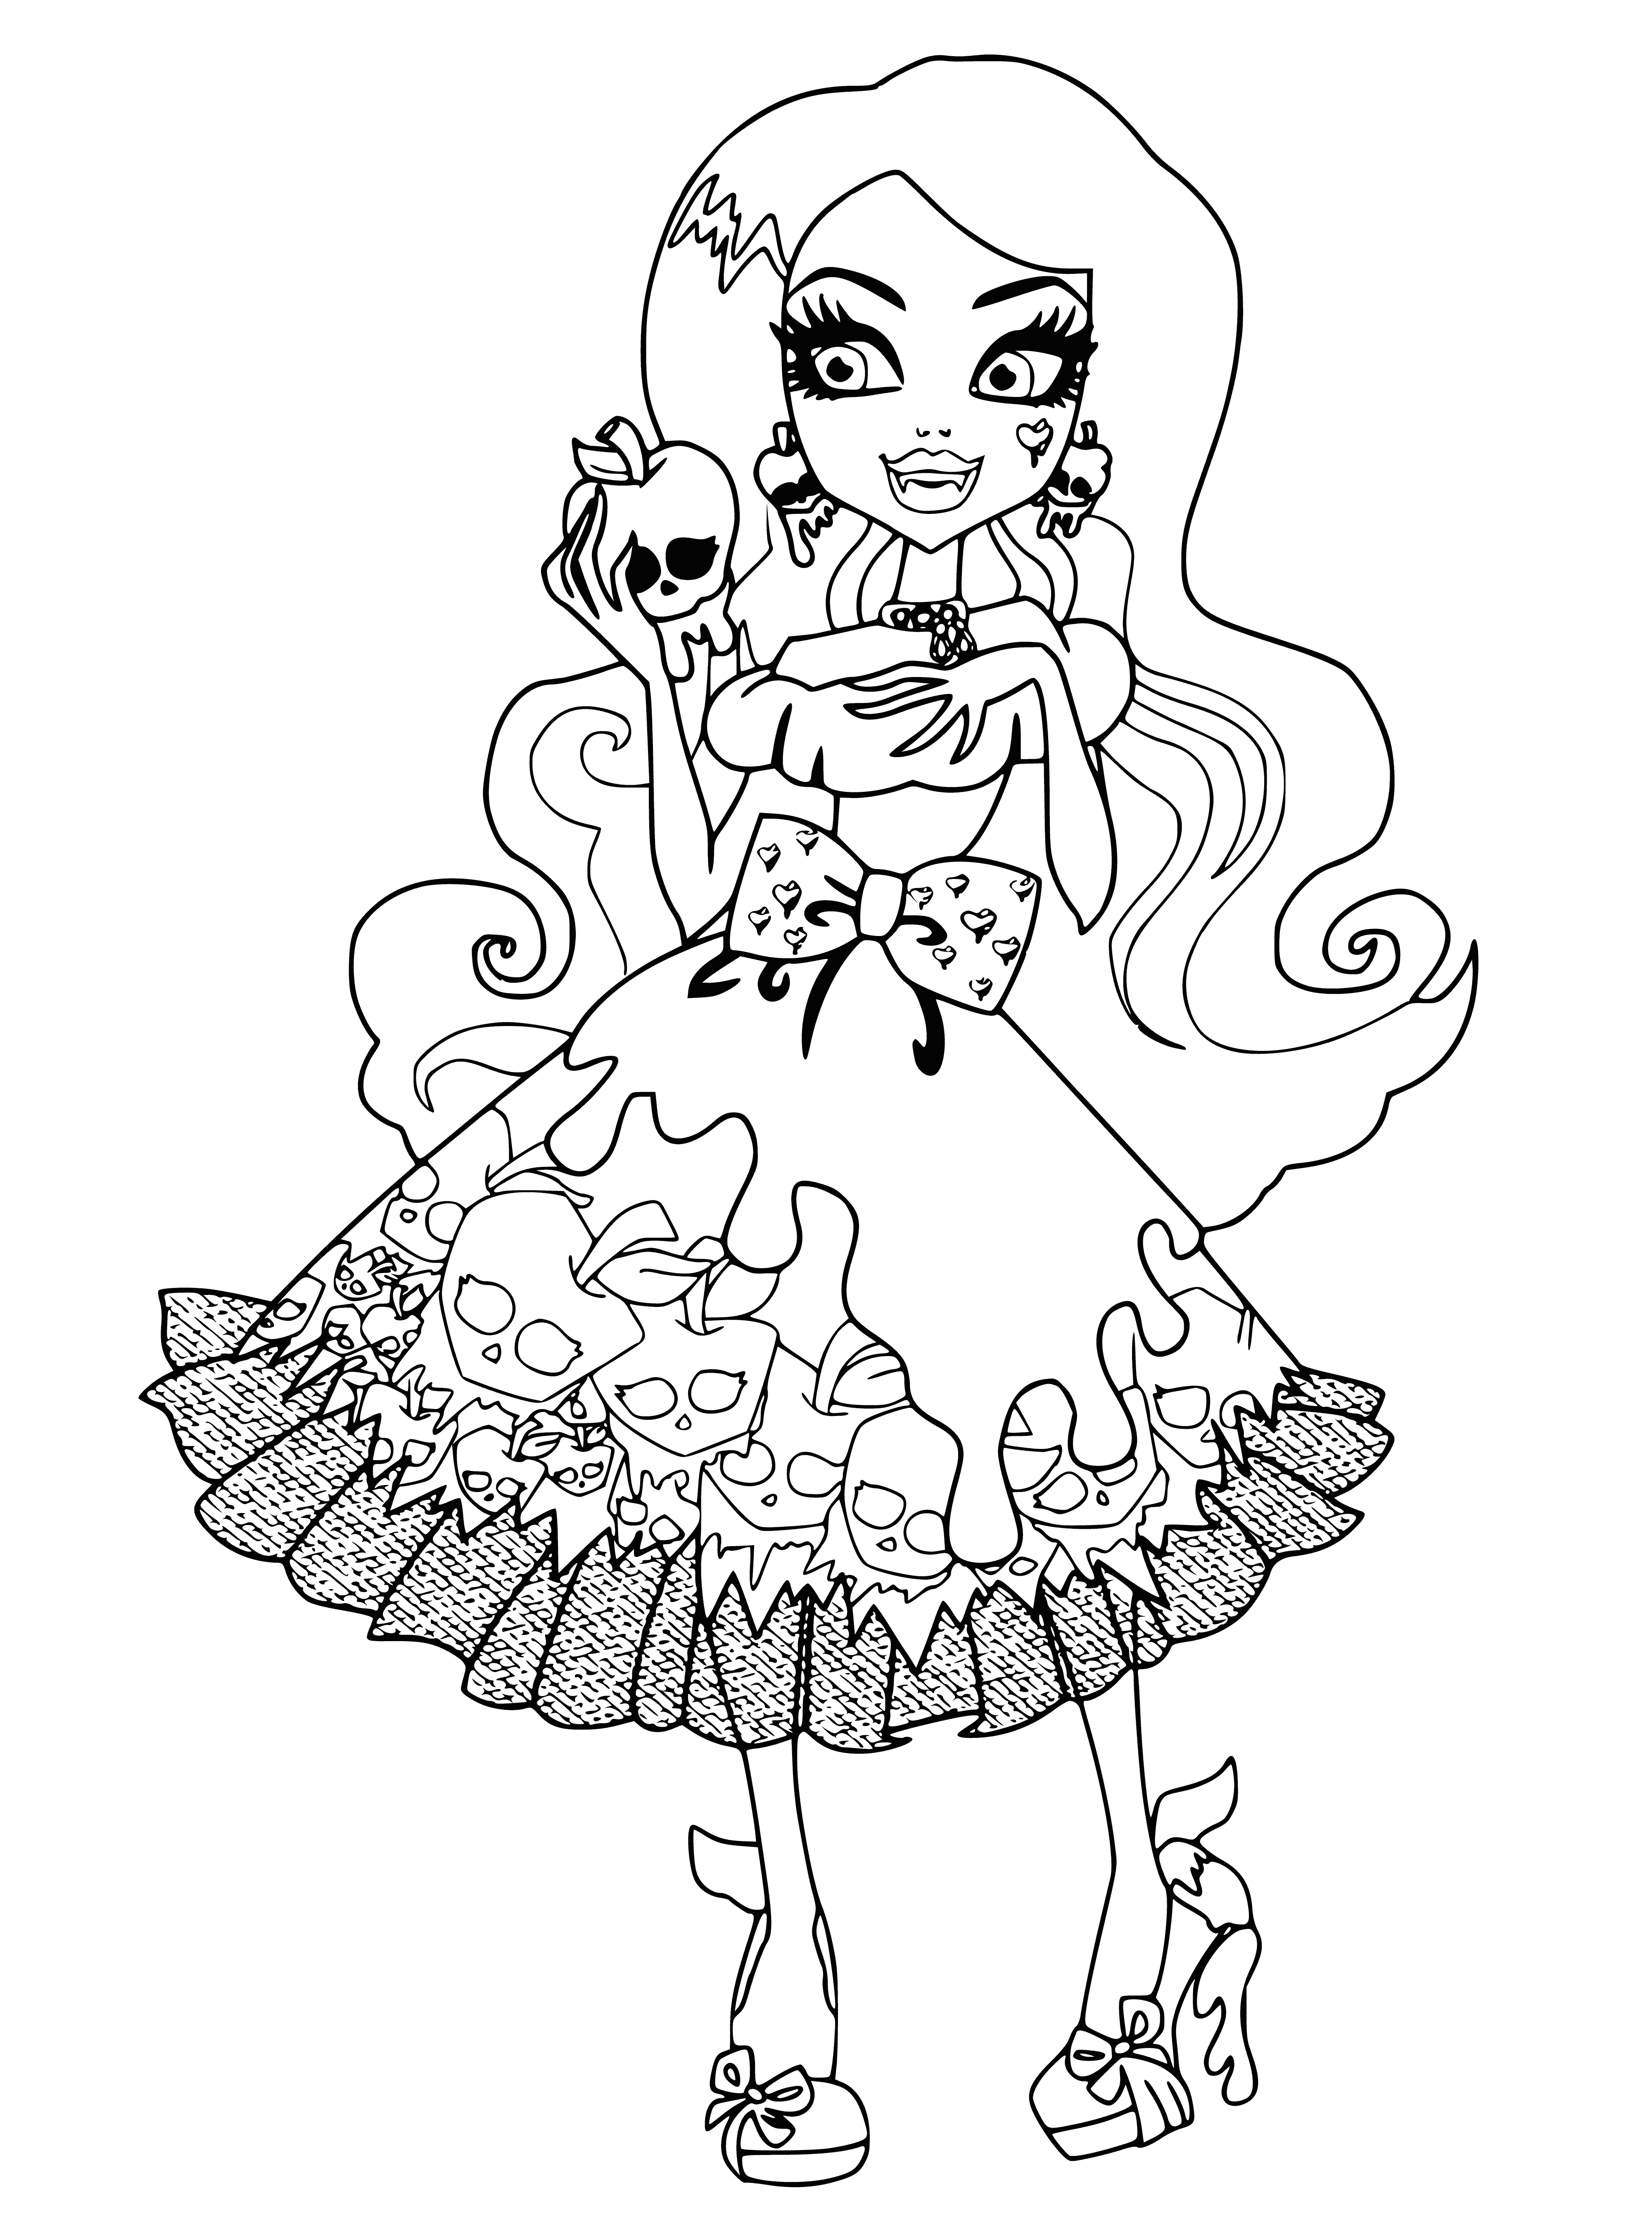 coloring page: Draculaura is smiling while holding a fork ready to enjoy her plate of food.